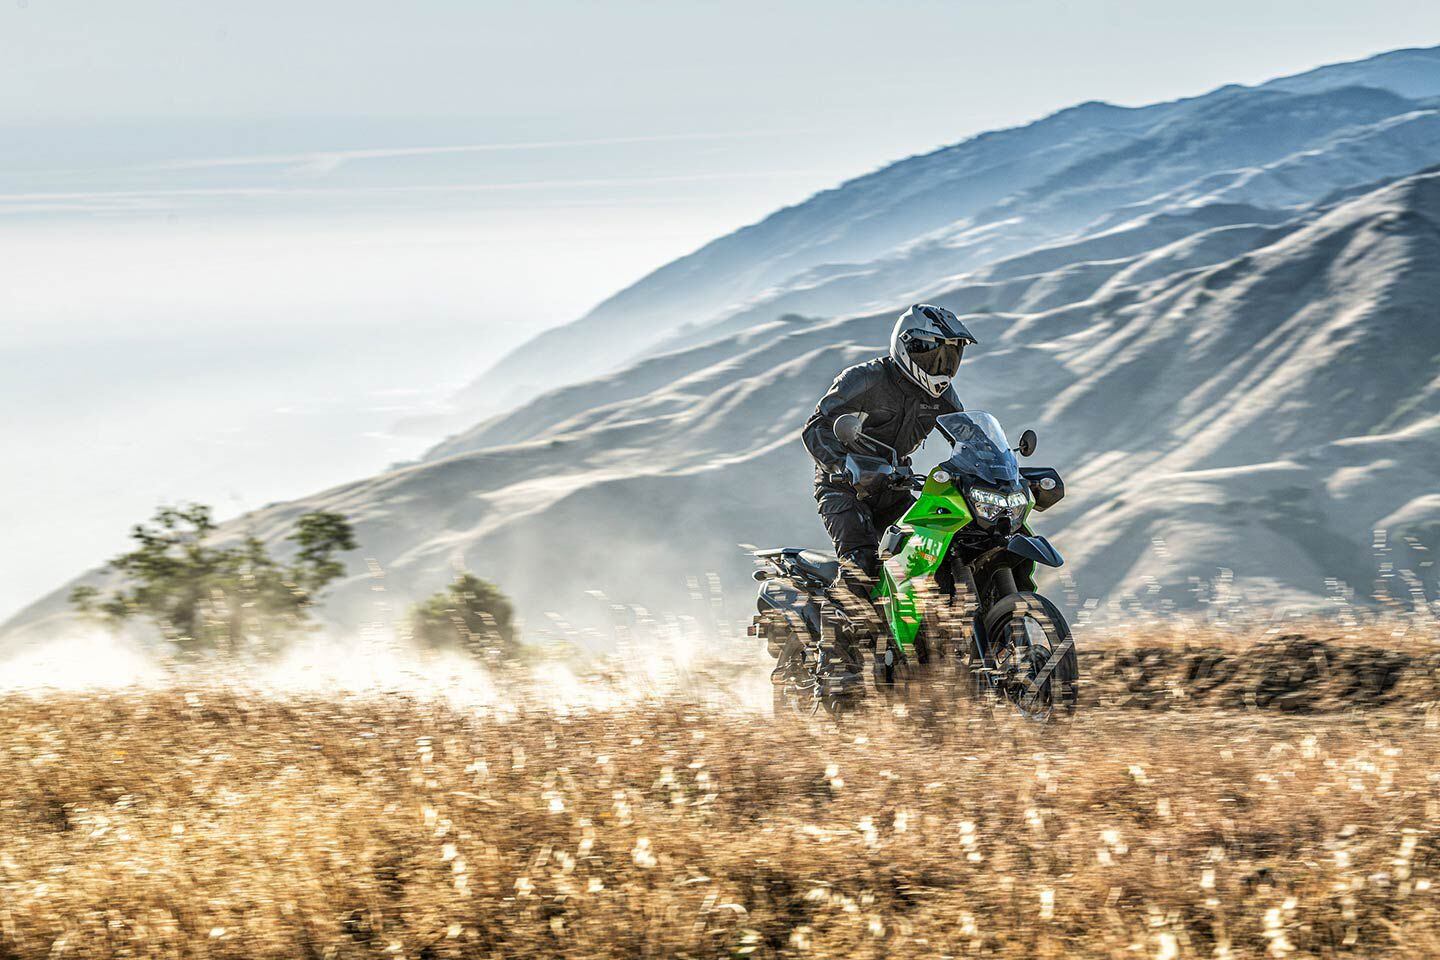 Get lost in the mountains on a KLR650 S.